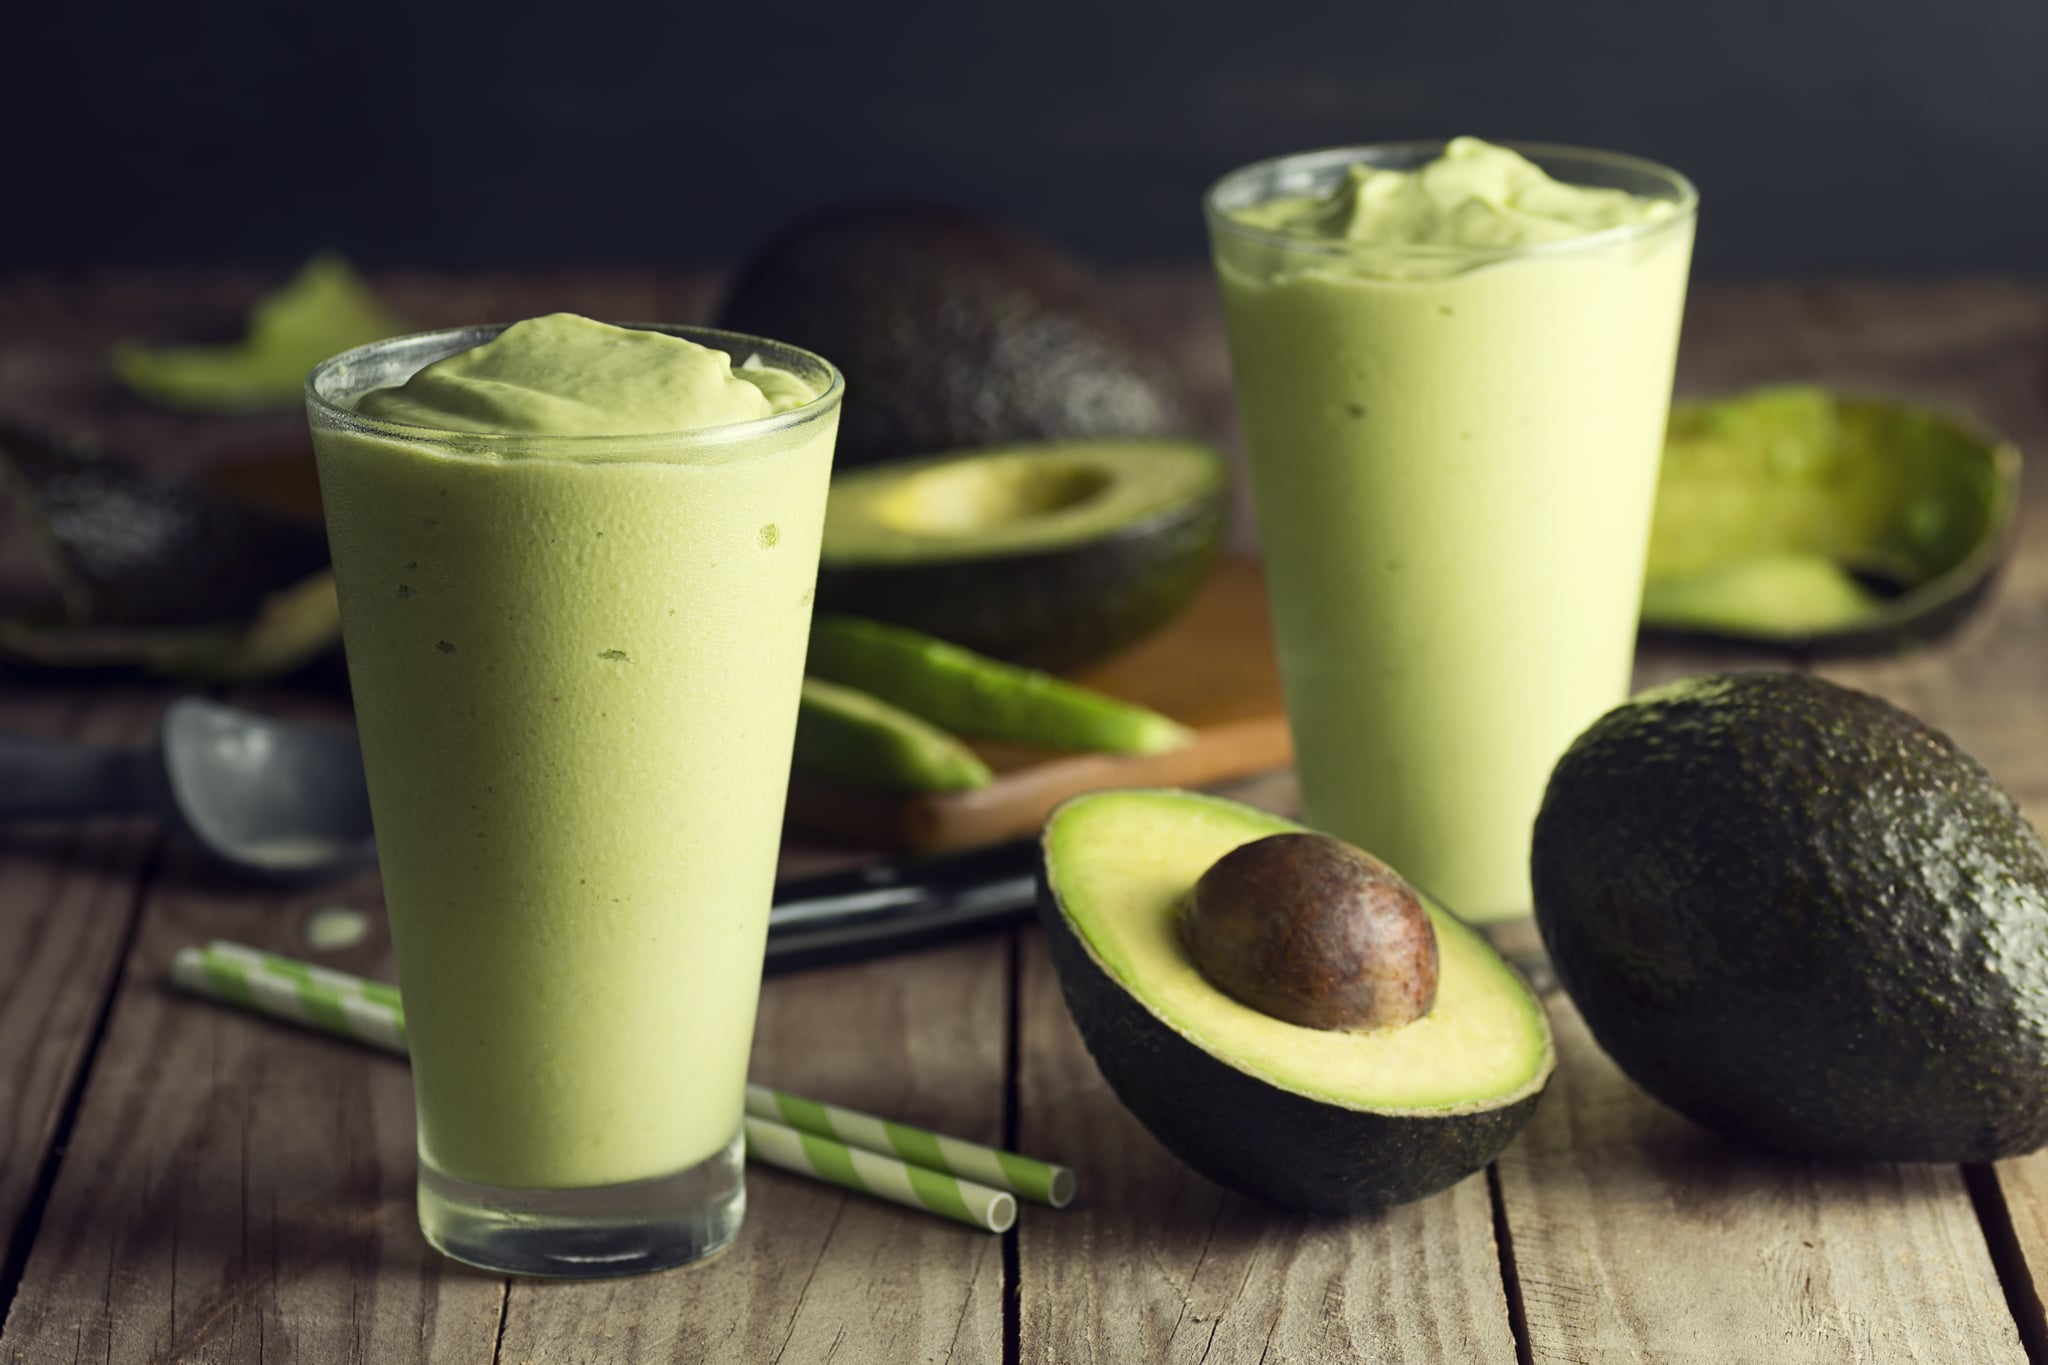 What Is The First Step Of Making The Avocado Juice In Buton?